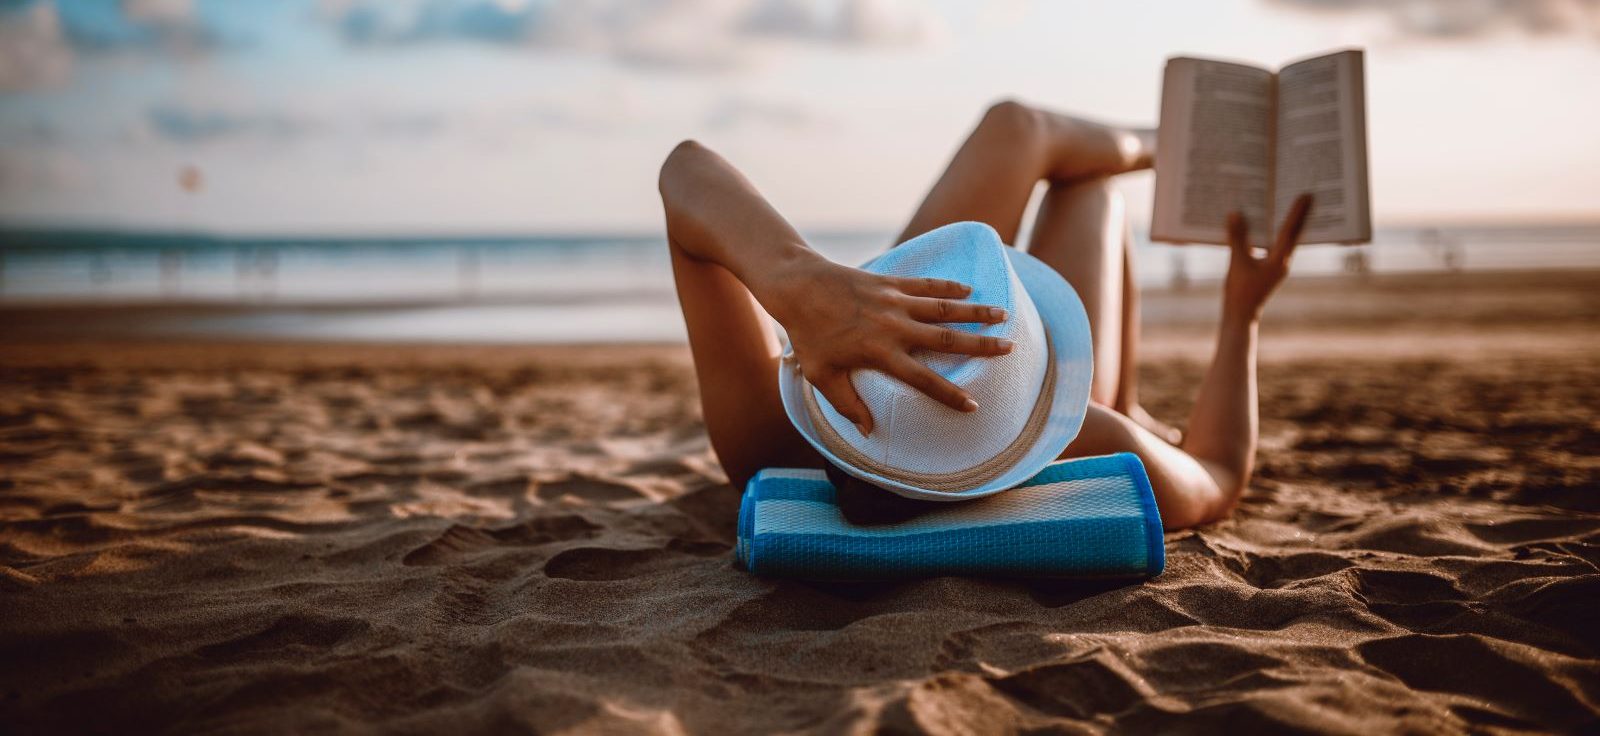 With summer here, many of us will be spending time in the sun. An oncologist offers these tips for preventing skin cancer.